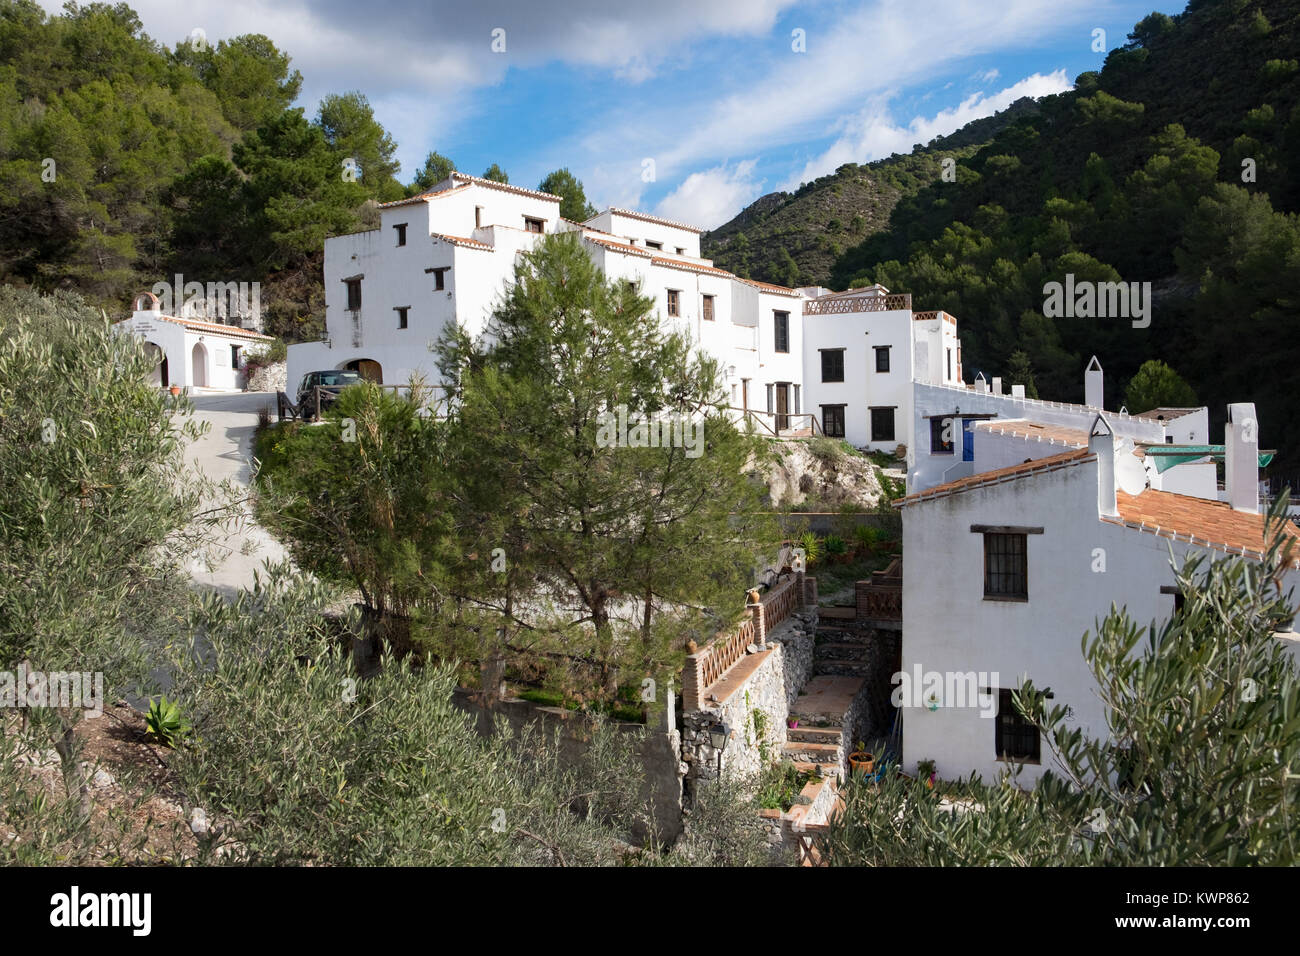 El Acebuchal, a white village or peublo blanco, in the region east of Malaga. Once deserted, the village has recently been restored. Stock Photo